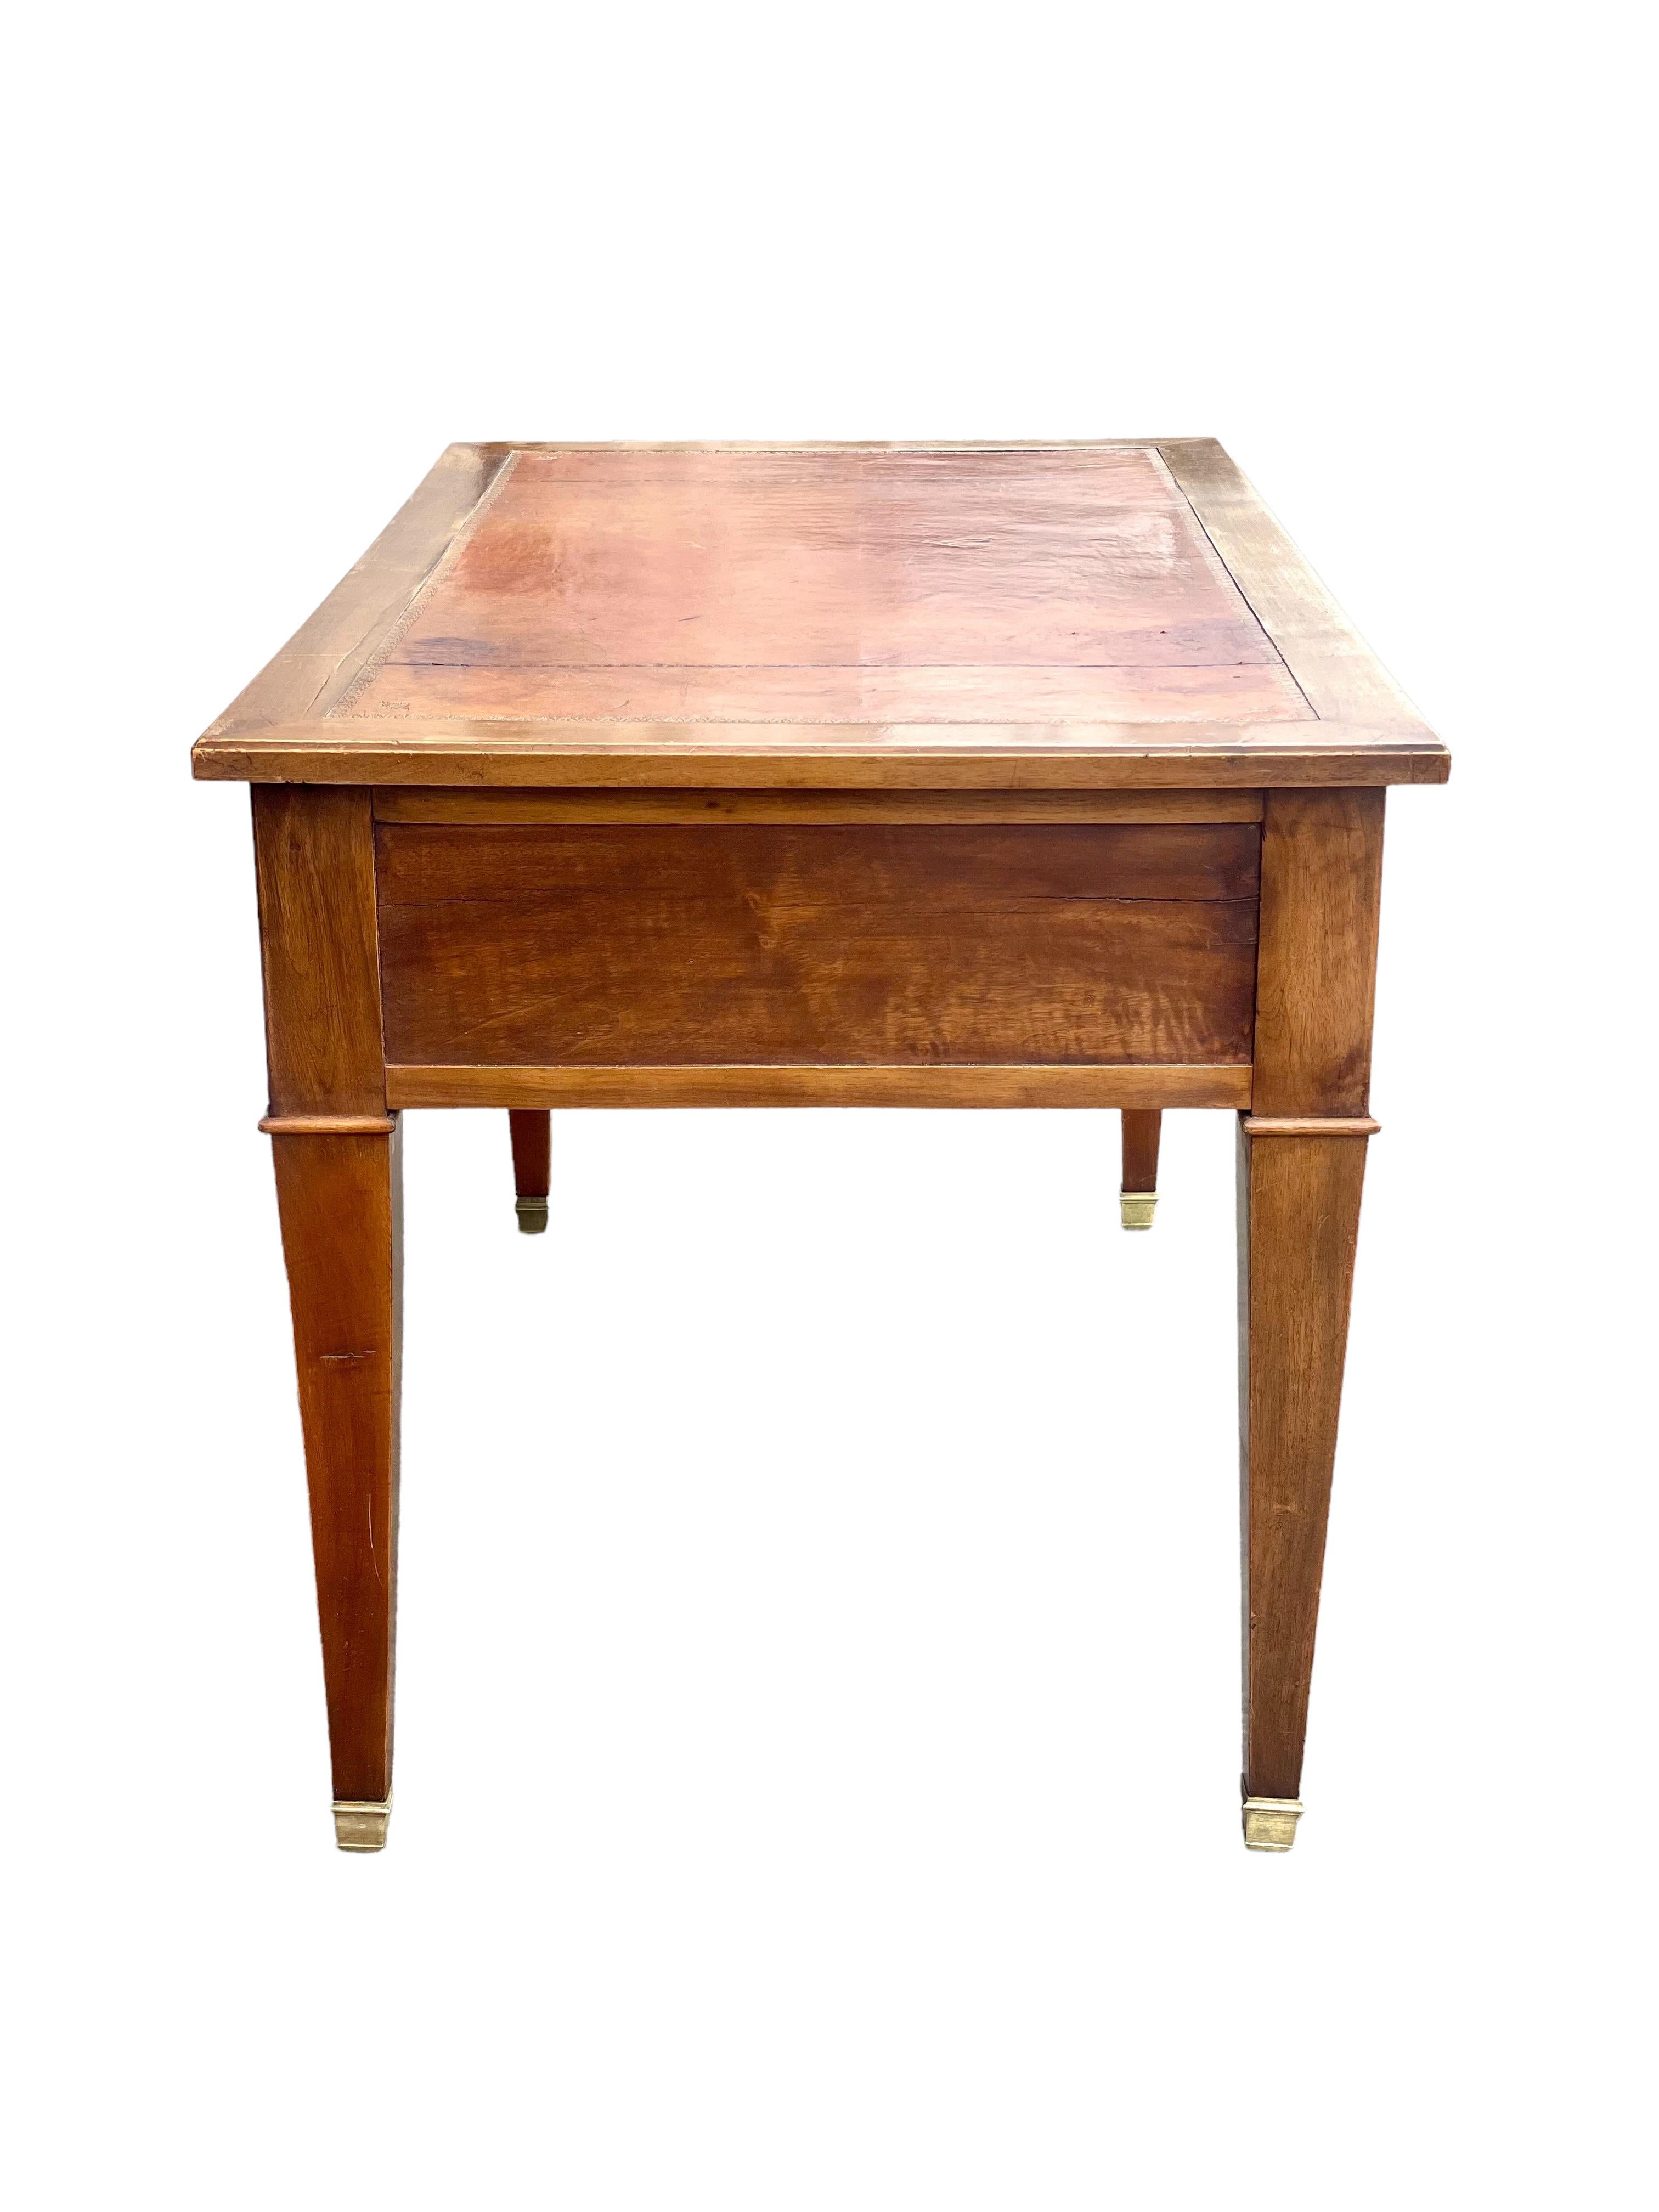 19th Century Louis XVI Style Leather Top Writing Desk For Sale 8